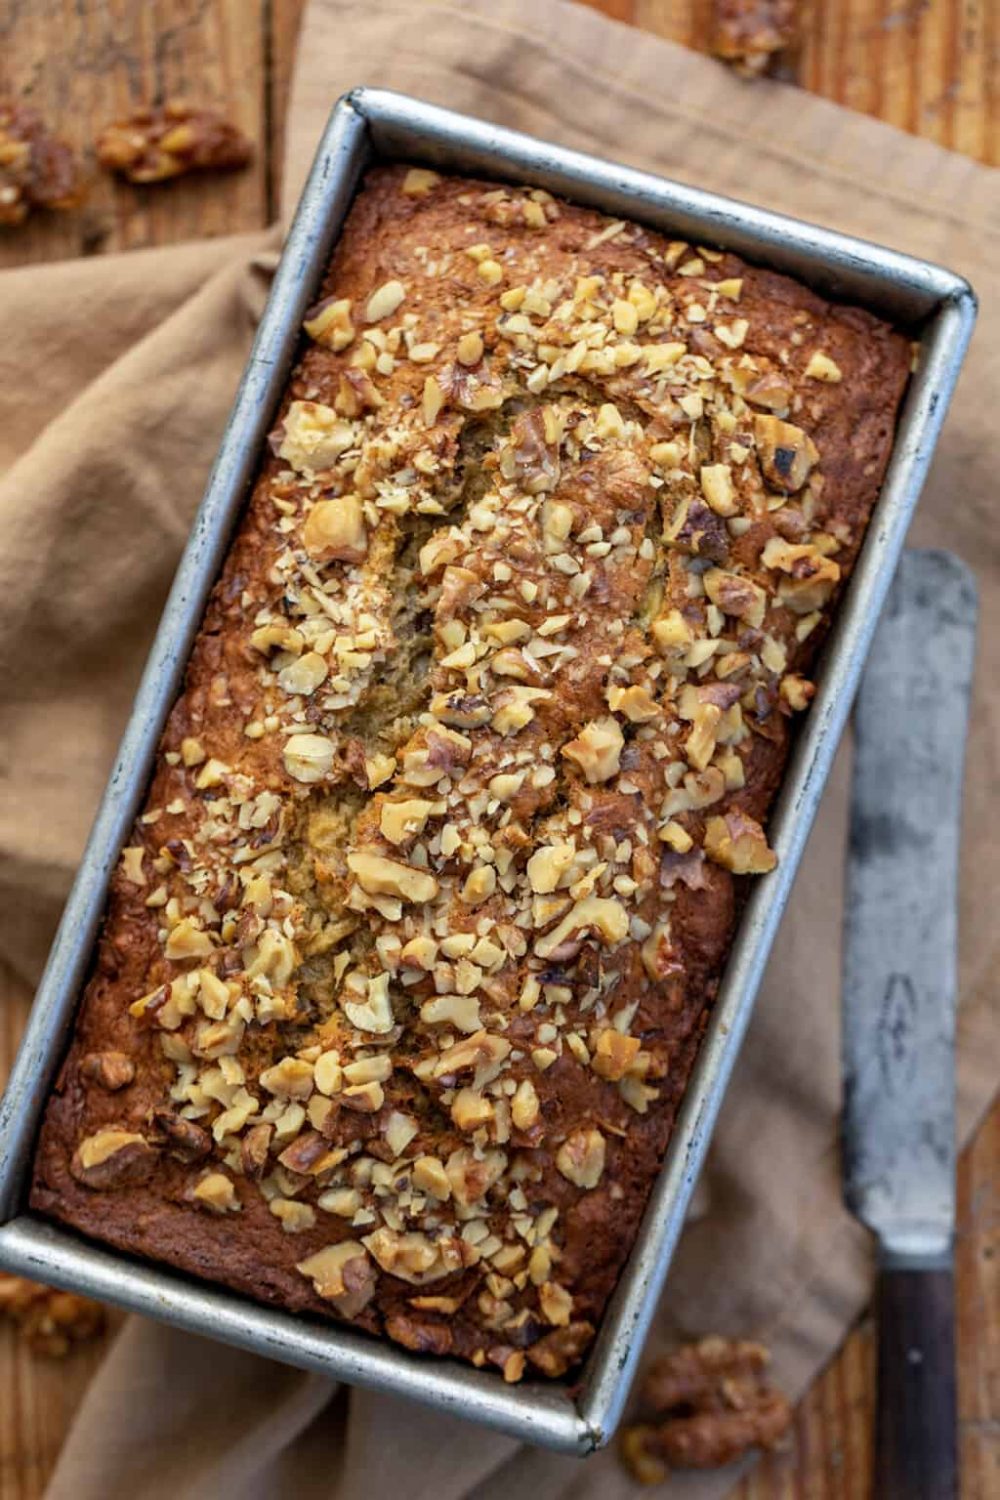 Toasty Indulgence: Browned Butter Banana Nut Bread Recipe